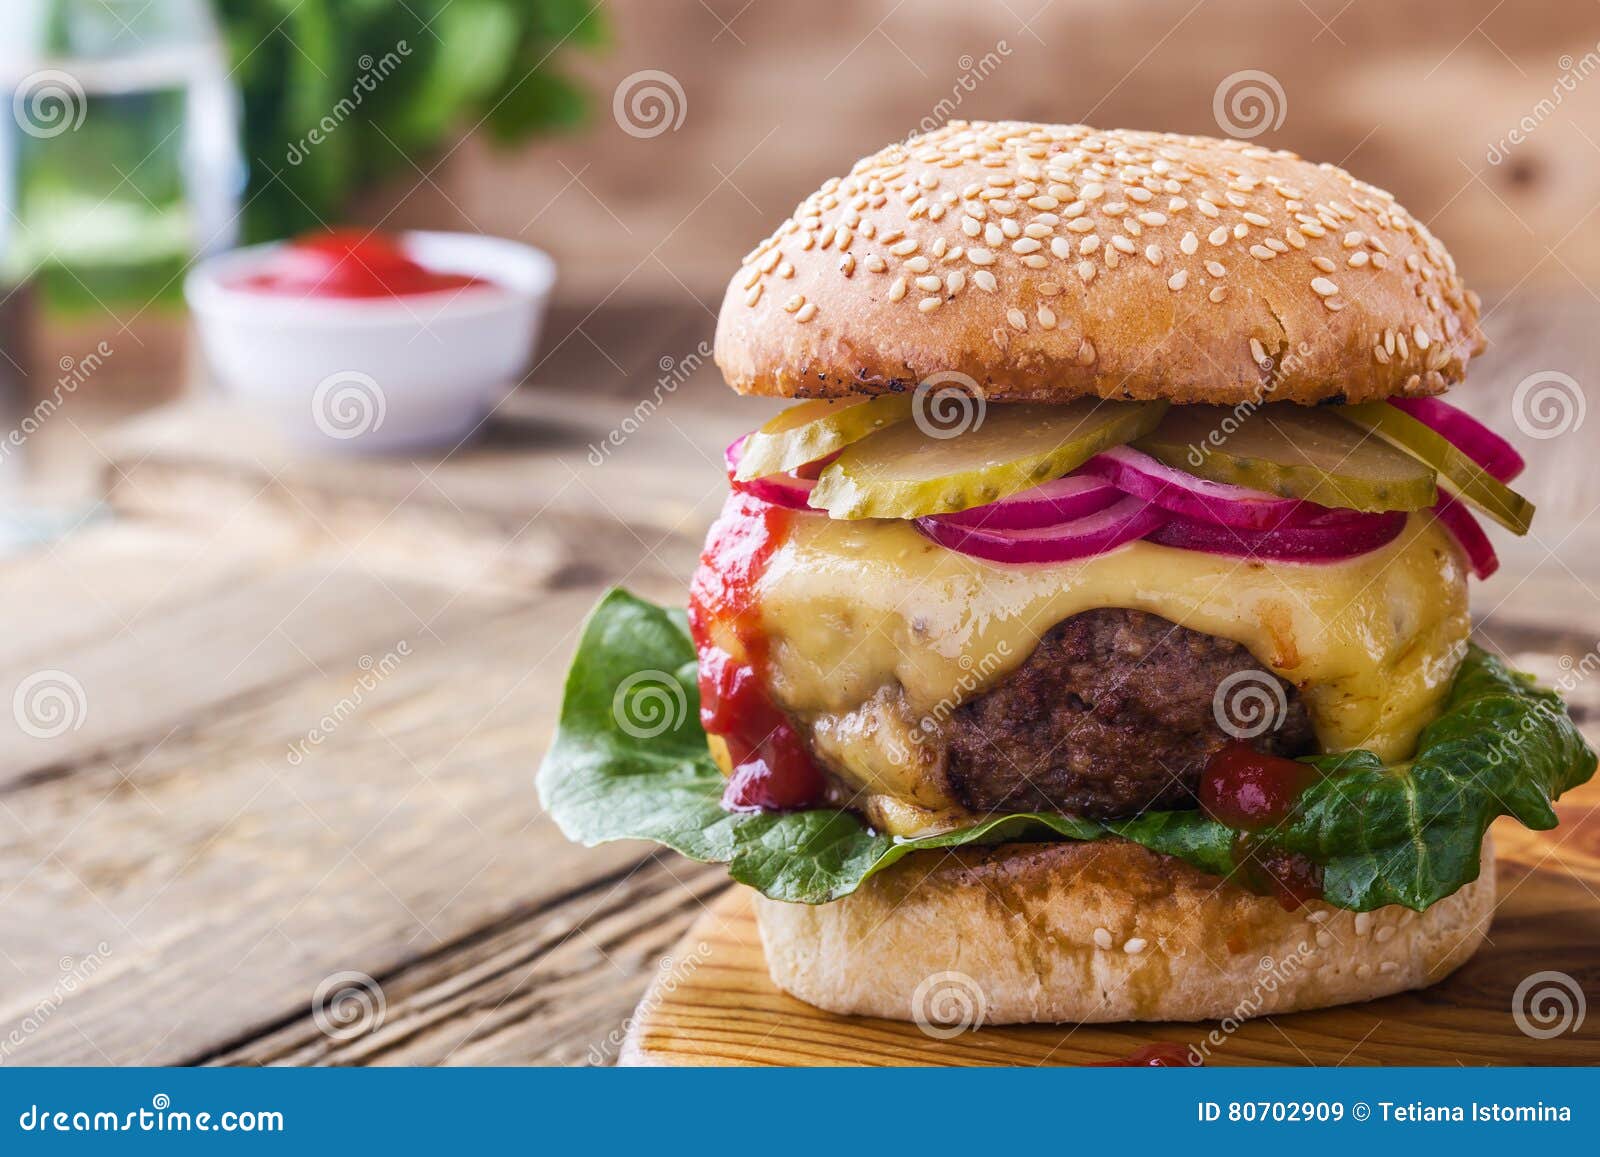 Burger with Gherkins, Red Onion and Lettuce Stock Image - Image of ...